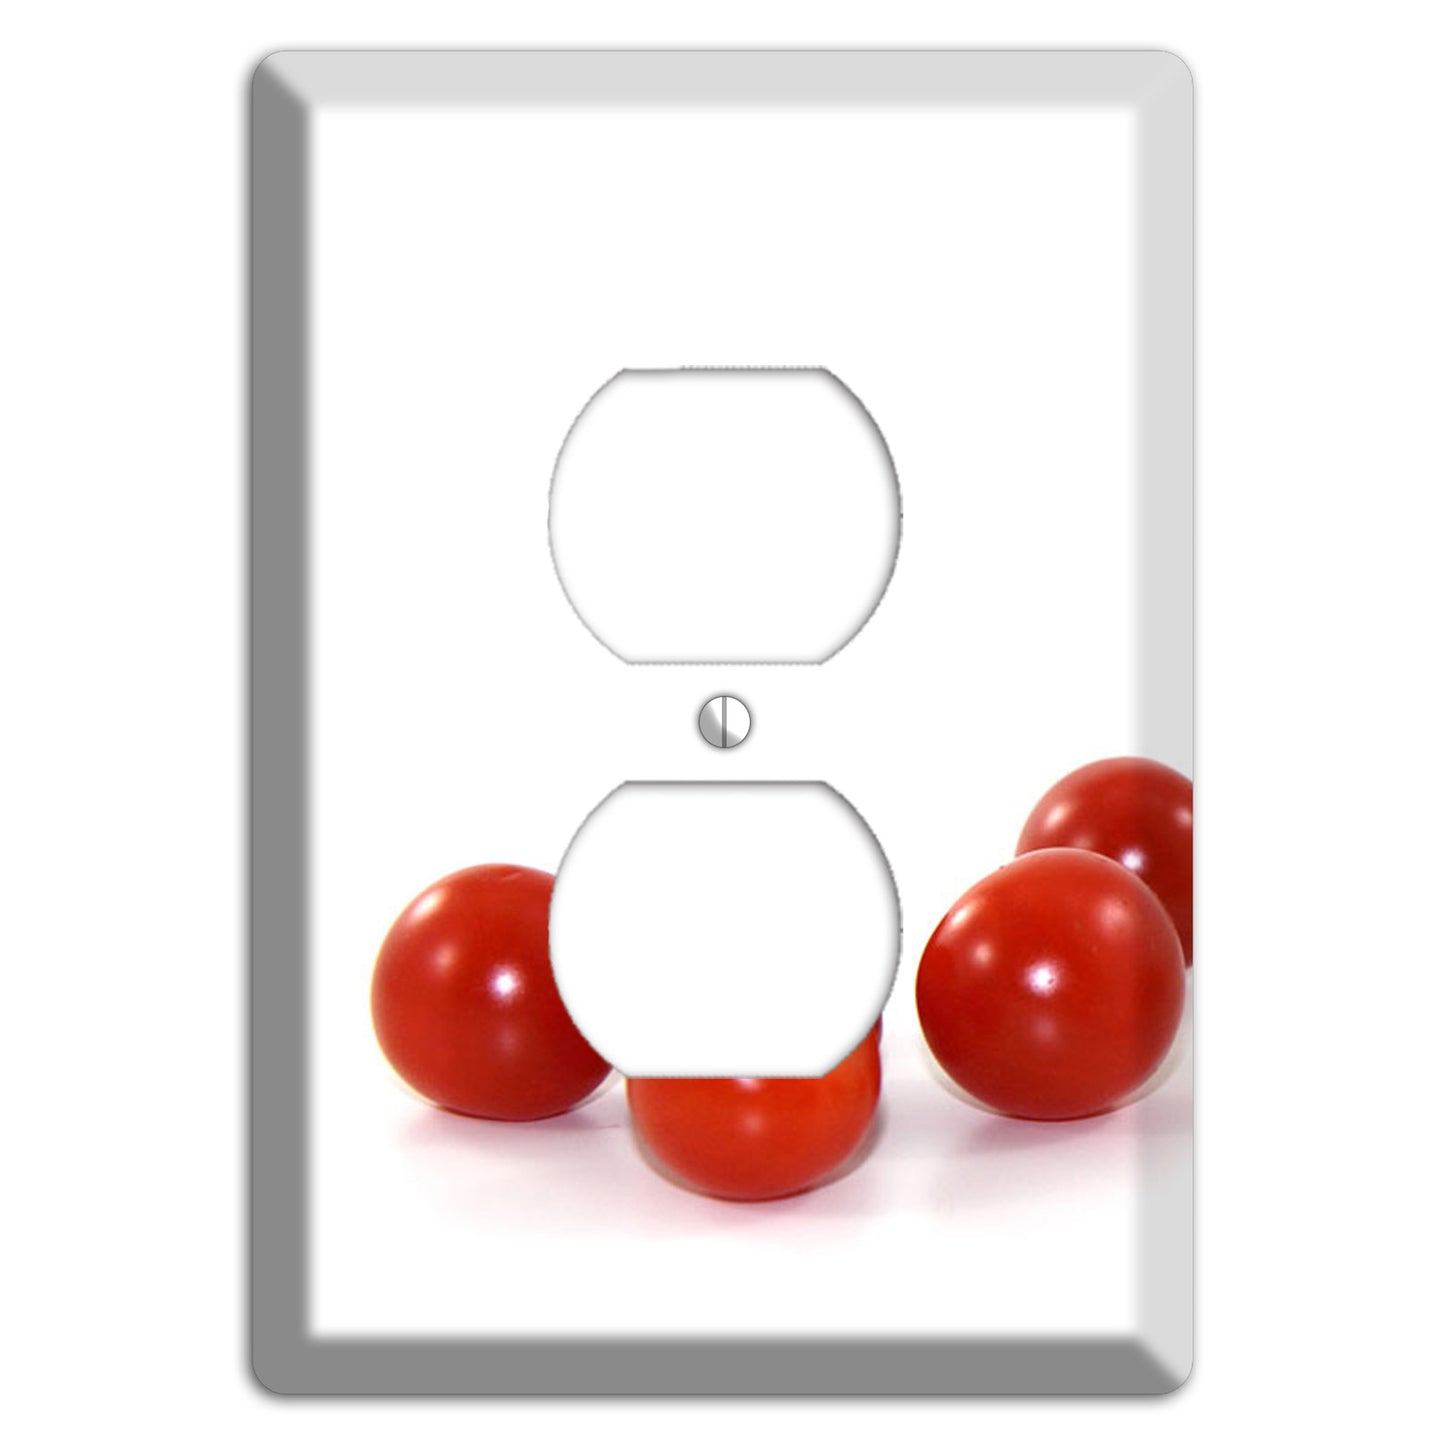 Tomaotes Small Duplex Outlet Wallplate